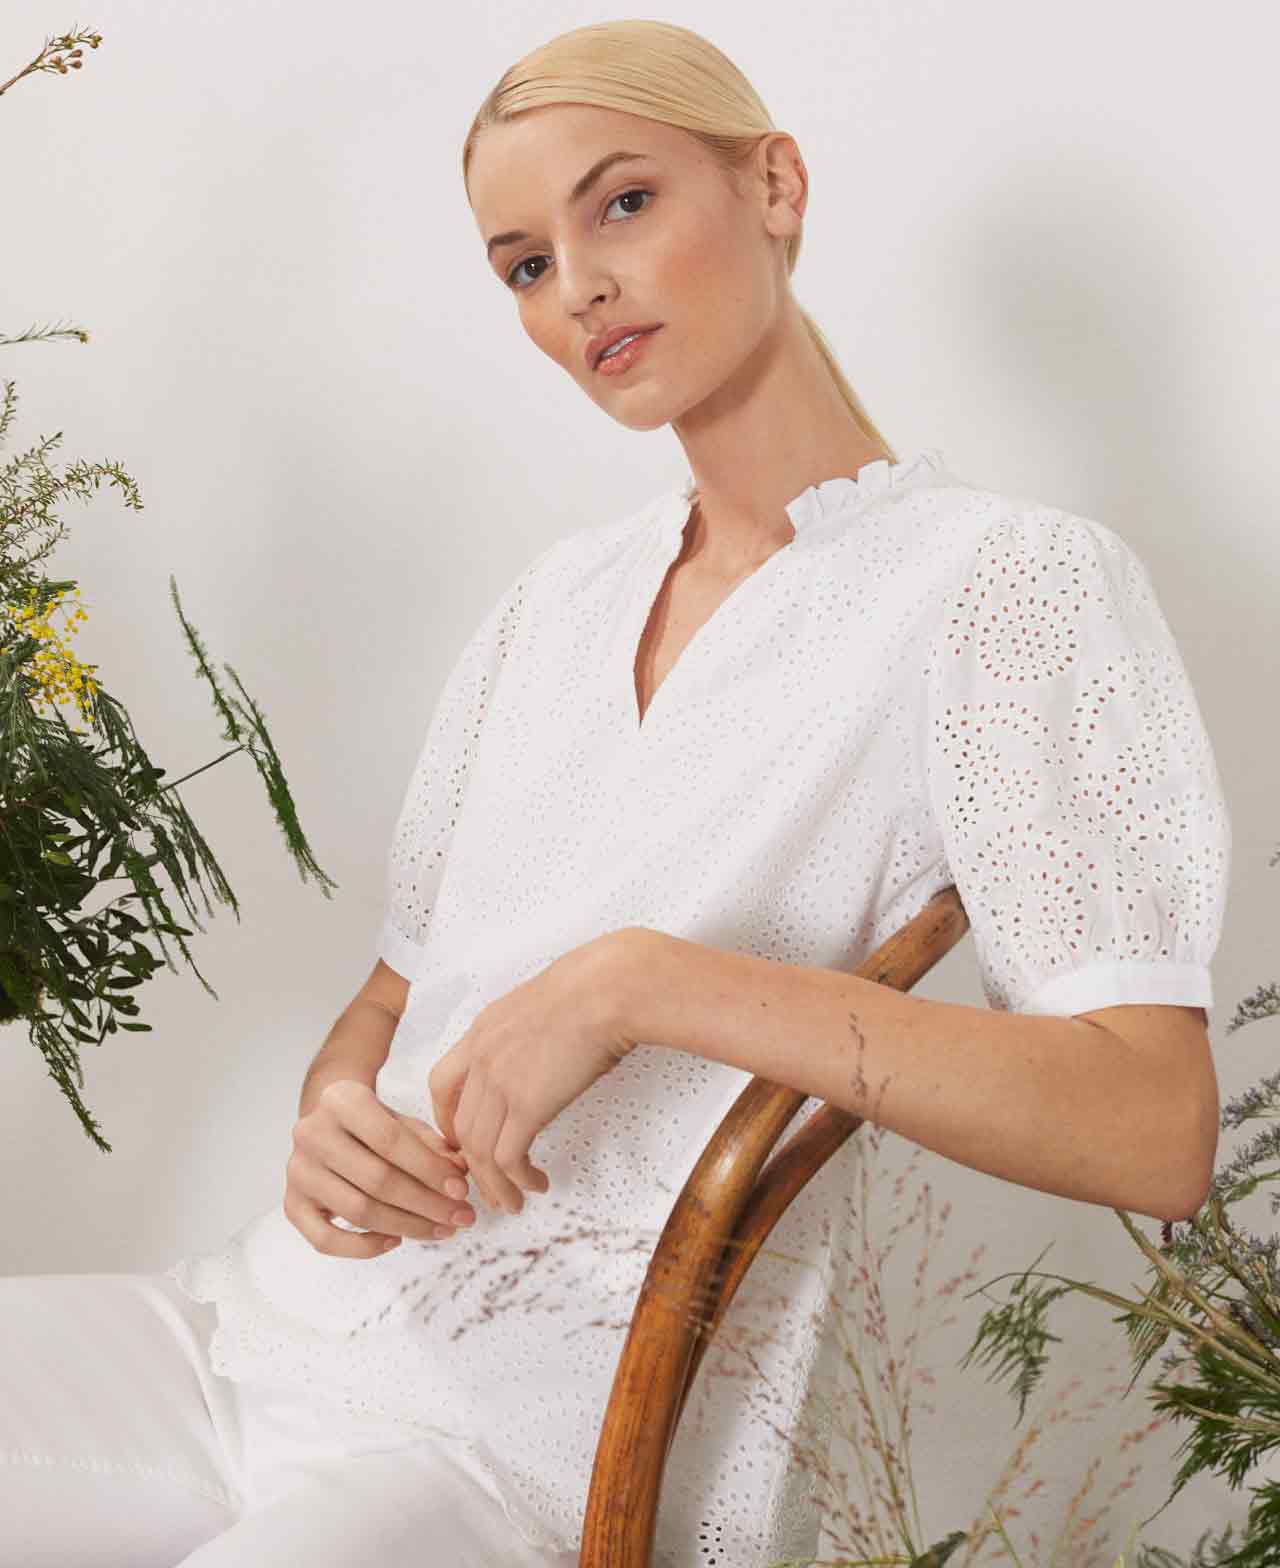 Hobbs model sits on a chair wearing a white broderie anglaise blouse.